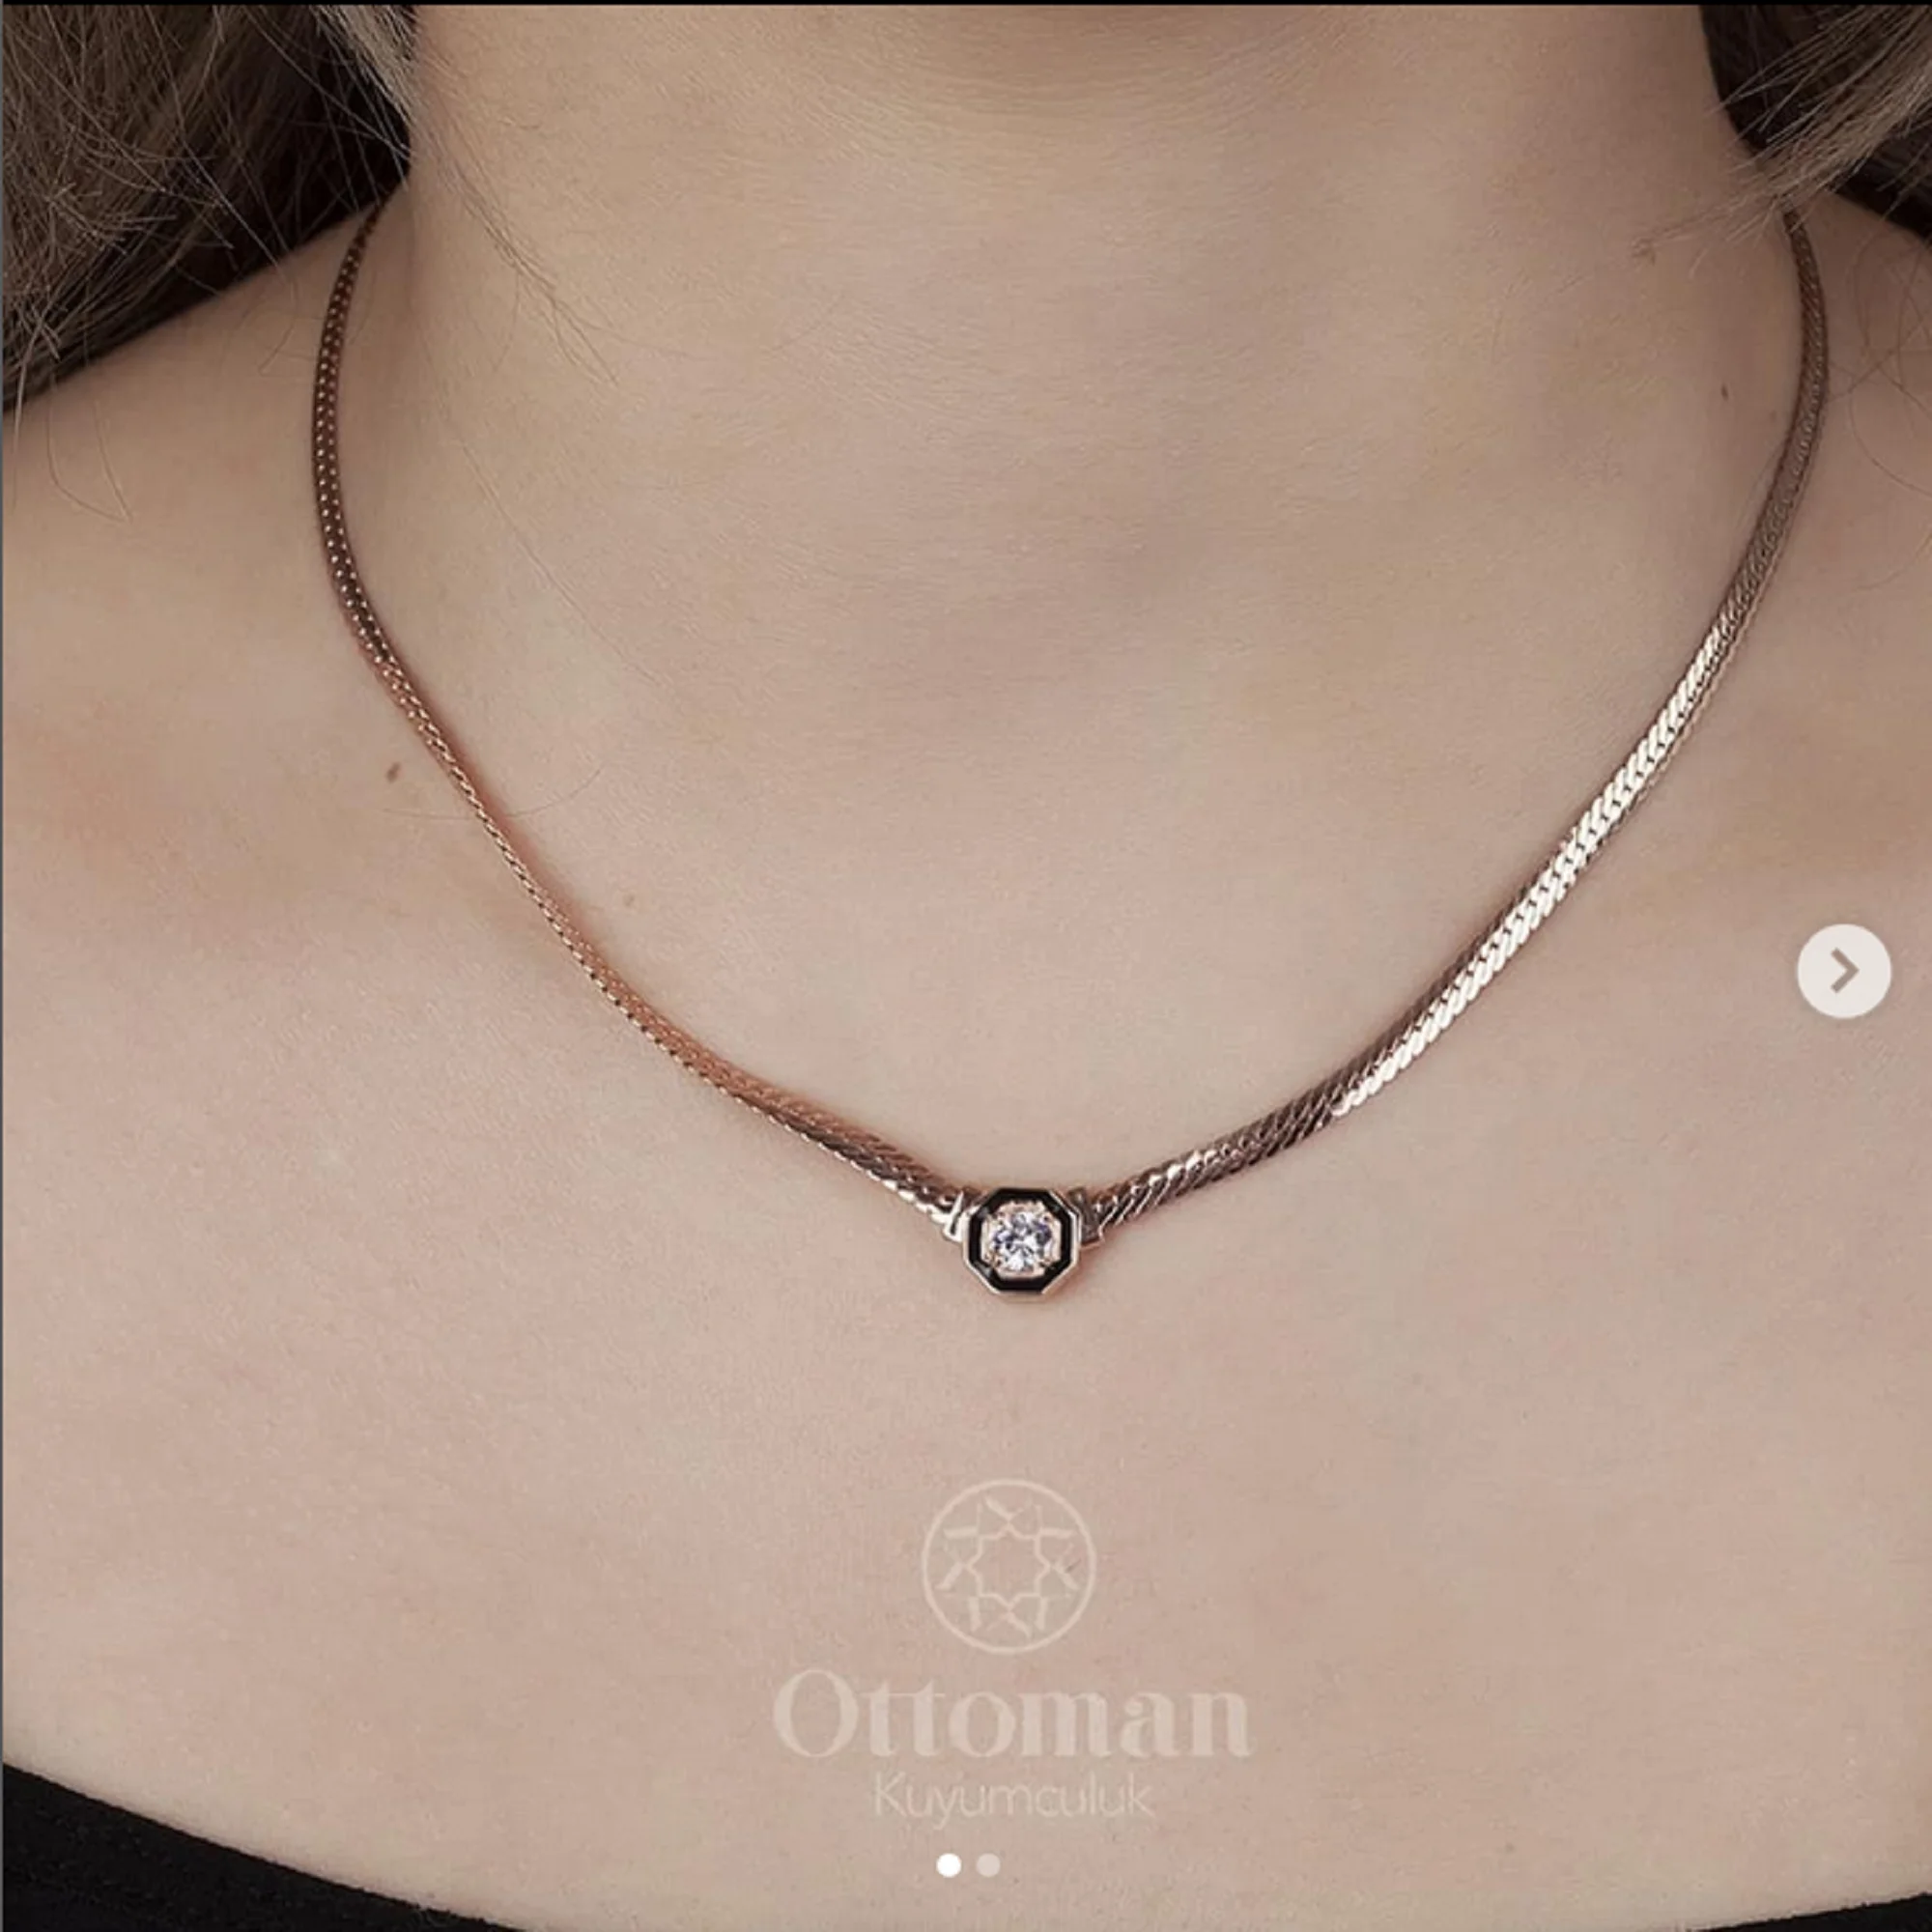 Ottoman Almond Model Silver Women's Ring Rose Plated Solitaire Necklace and Bracelet Handmade 925 Sterling Silver model wearing a cartier necklace постер 101 6 x 101 6 см